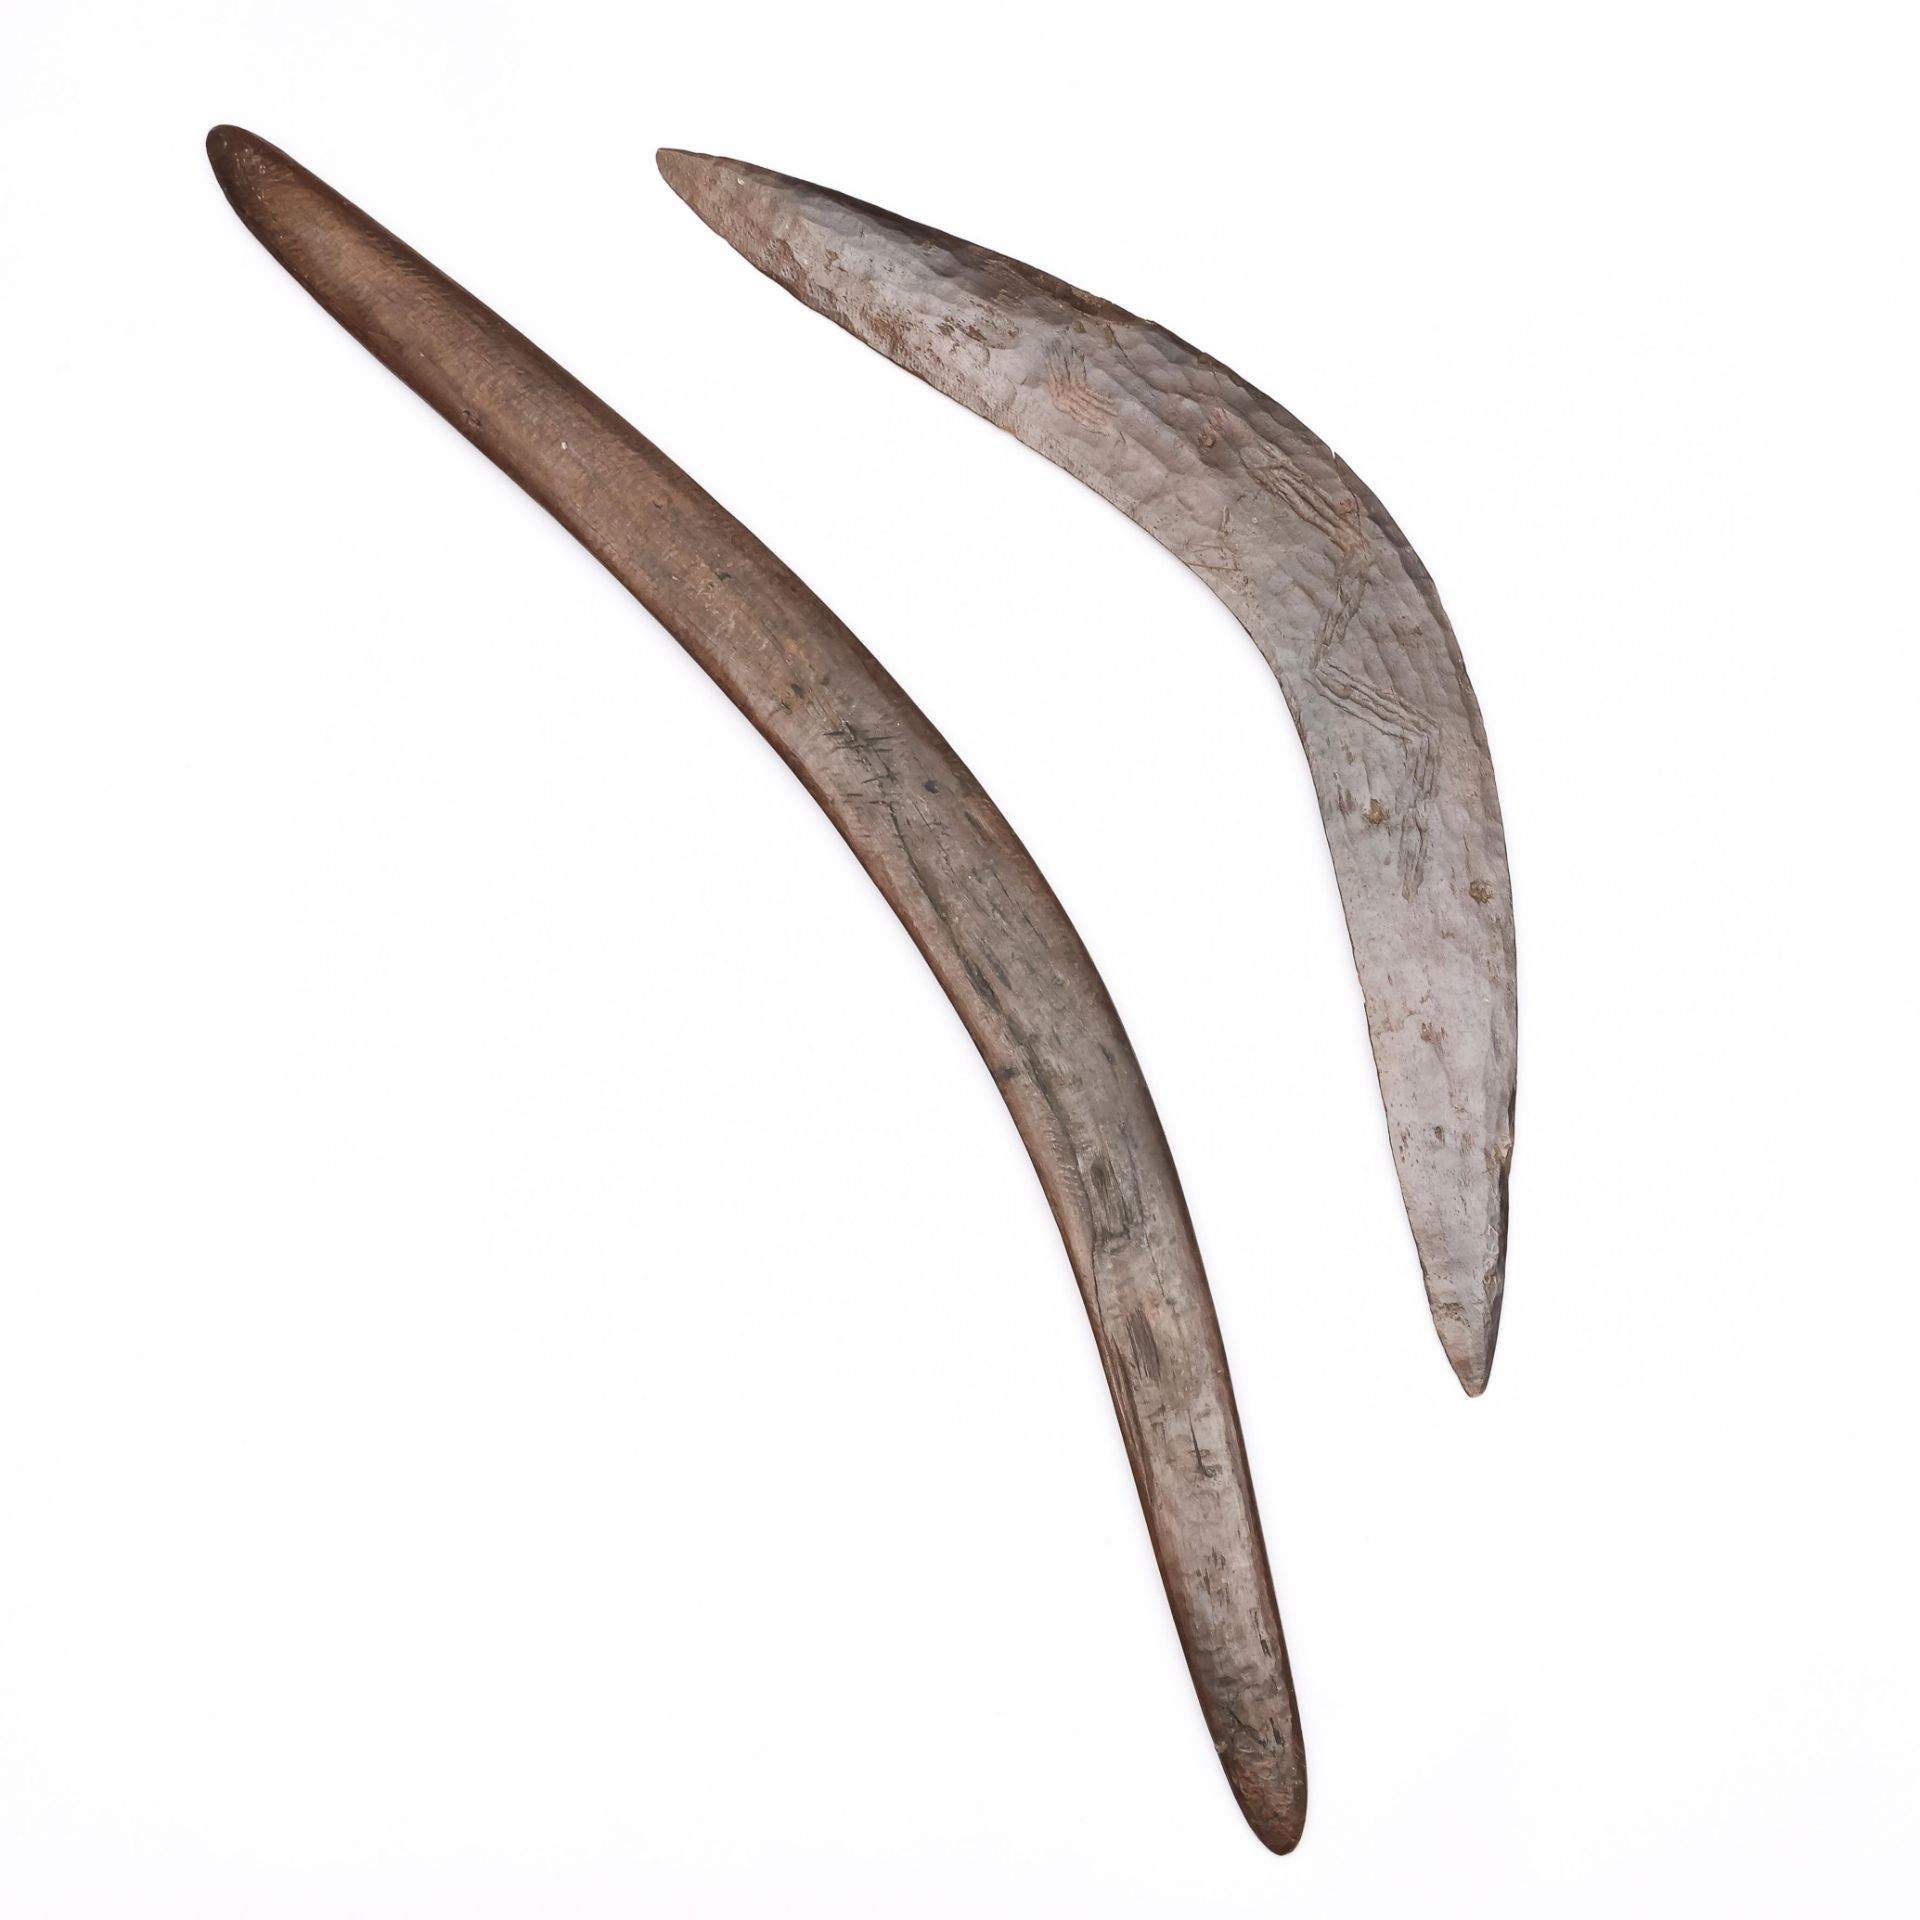 Australia, two Aboriginal boomerangs, both with a notched pattern. - Image 3 of 3